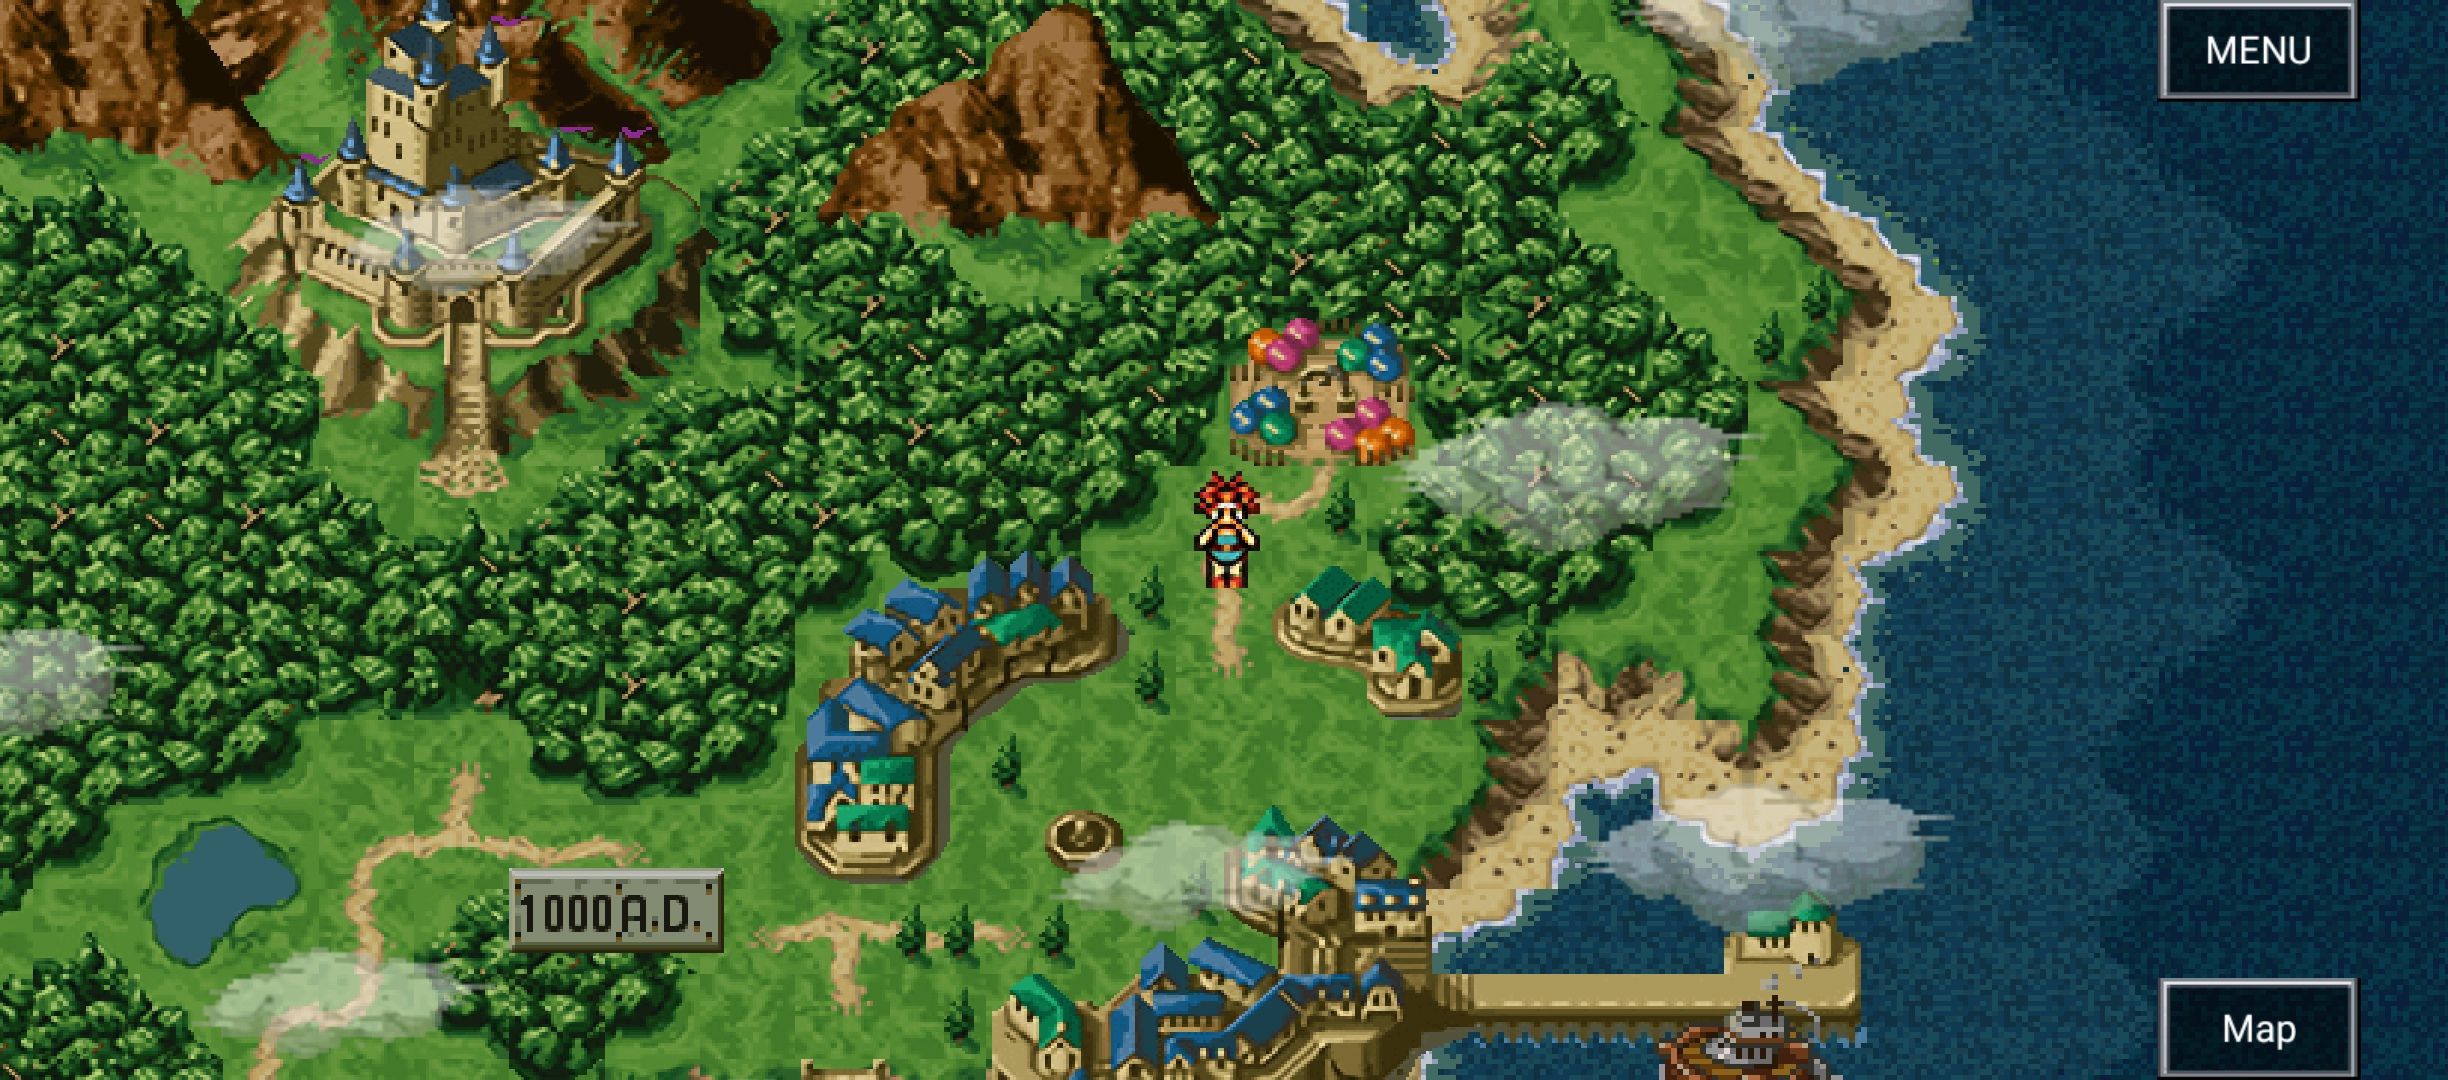 CHRONO TRIGGER game updat release (1)